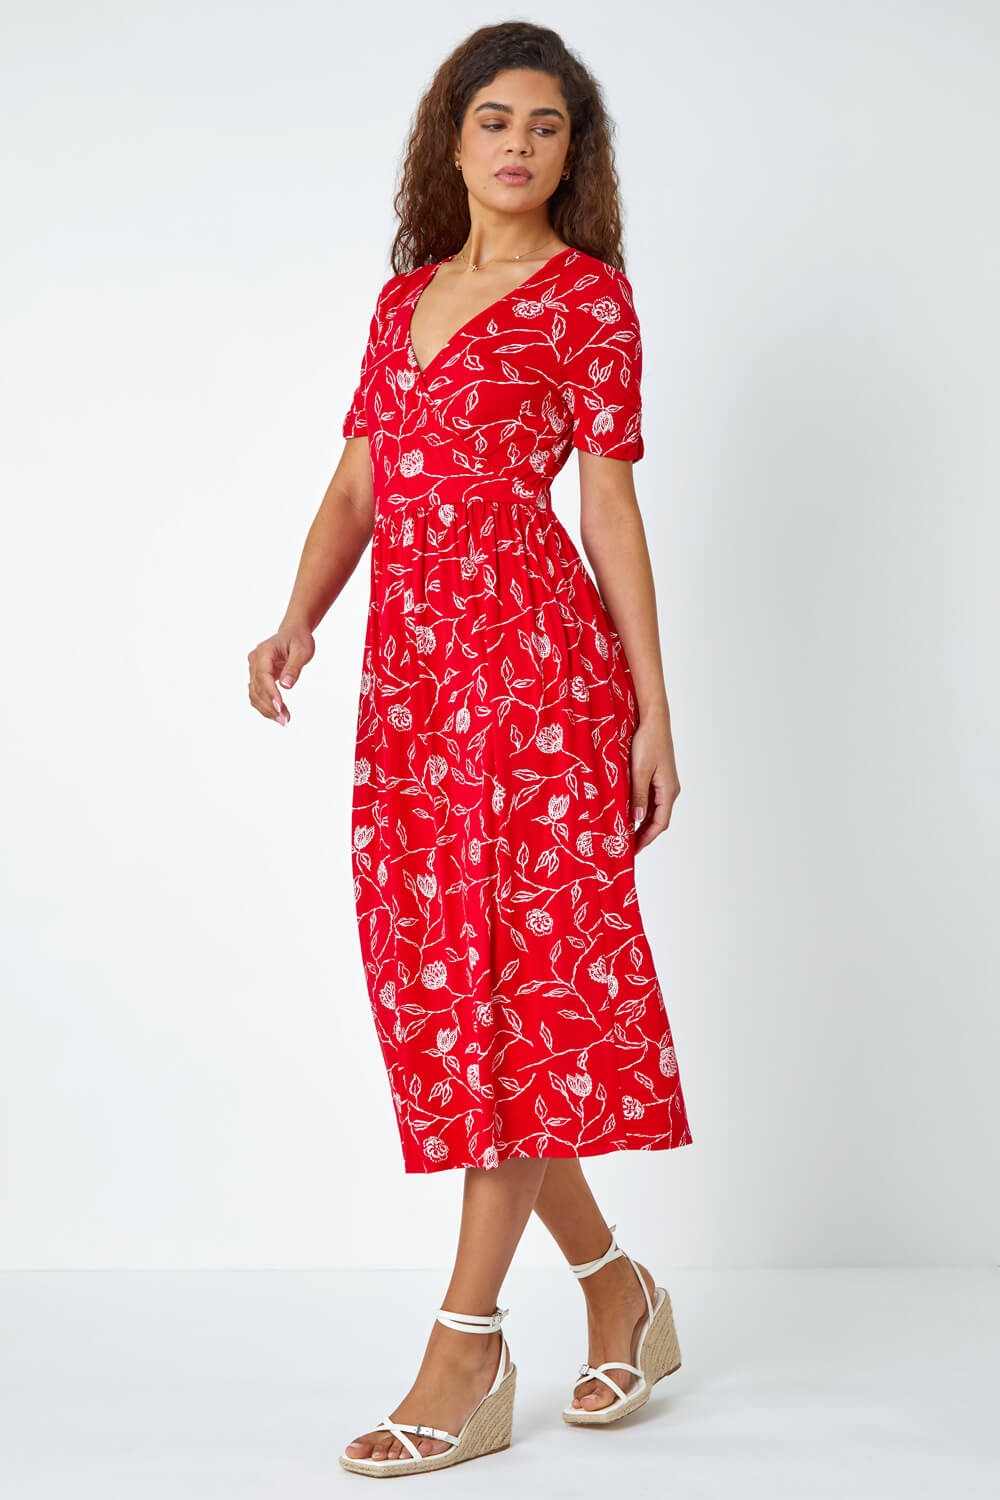 Red Floral Print Midi Wrap Stretch Dress, Image 2 of 5